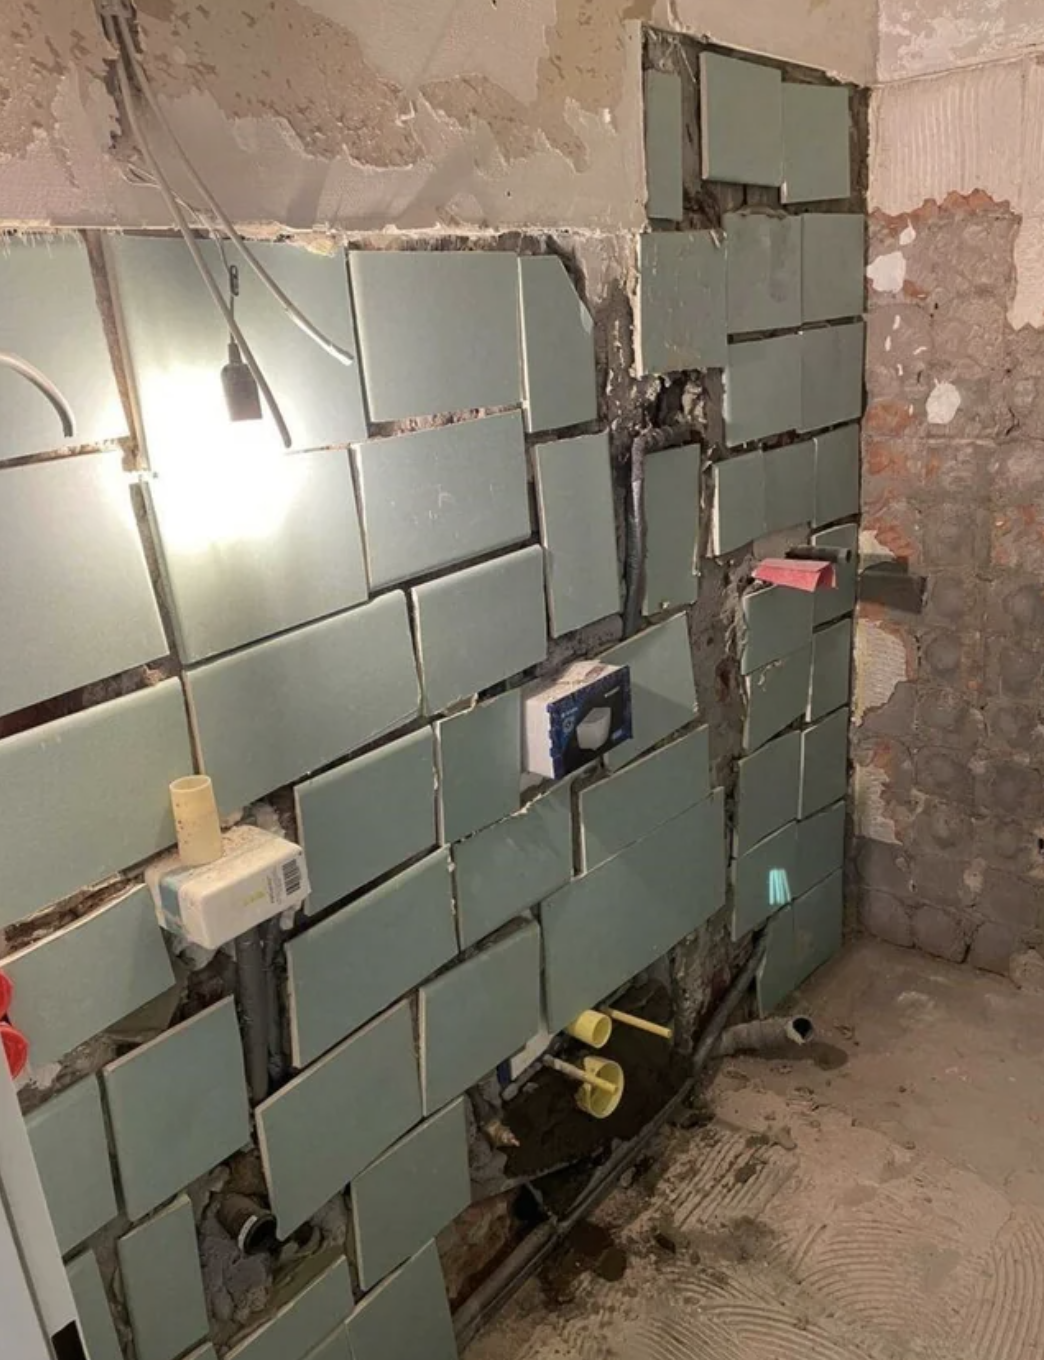 There has been an attempt of tiling a wall